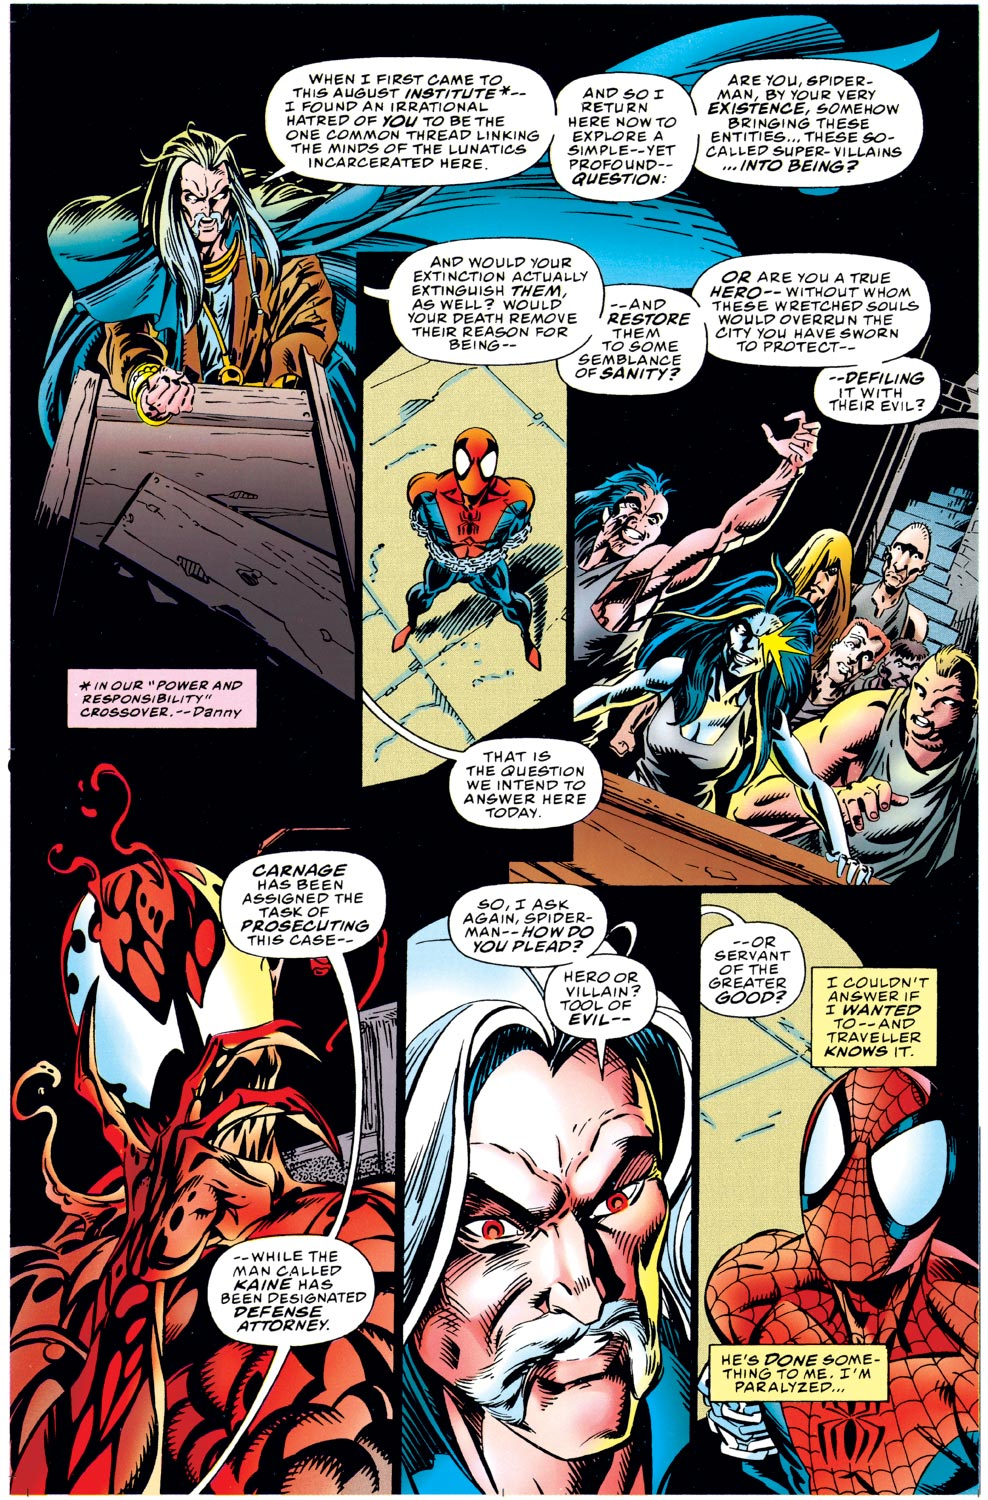 The Amazing Spider-Man (1963) 403 Page 3